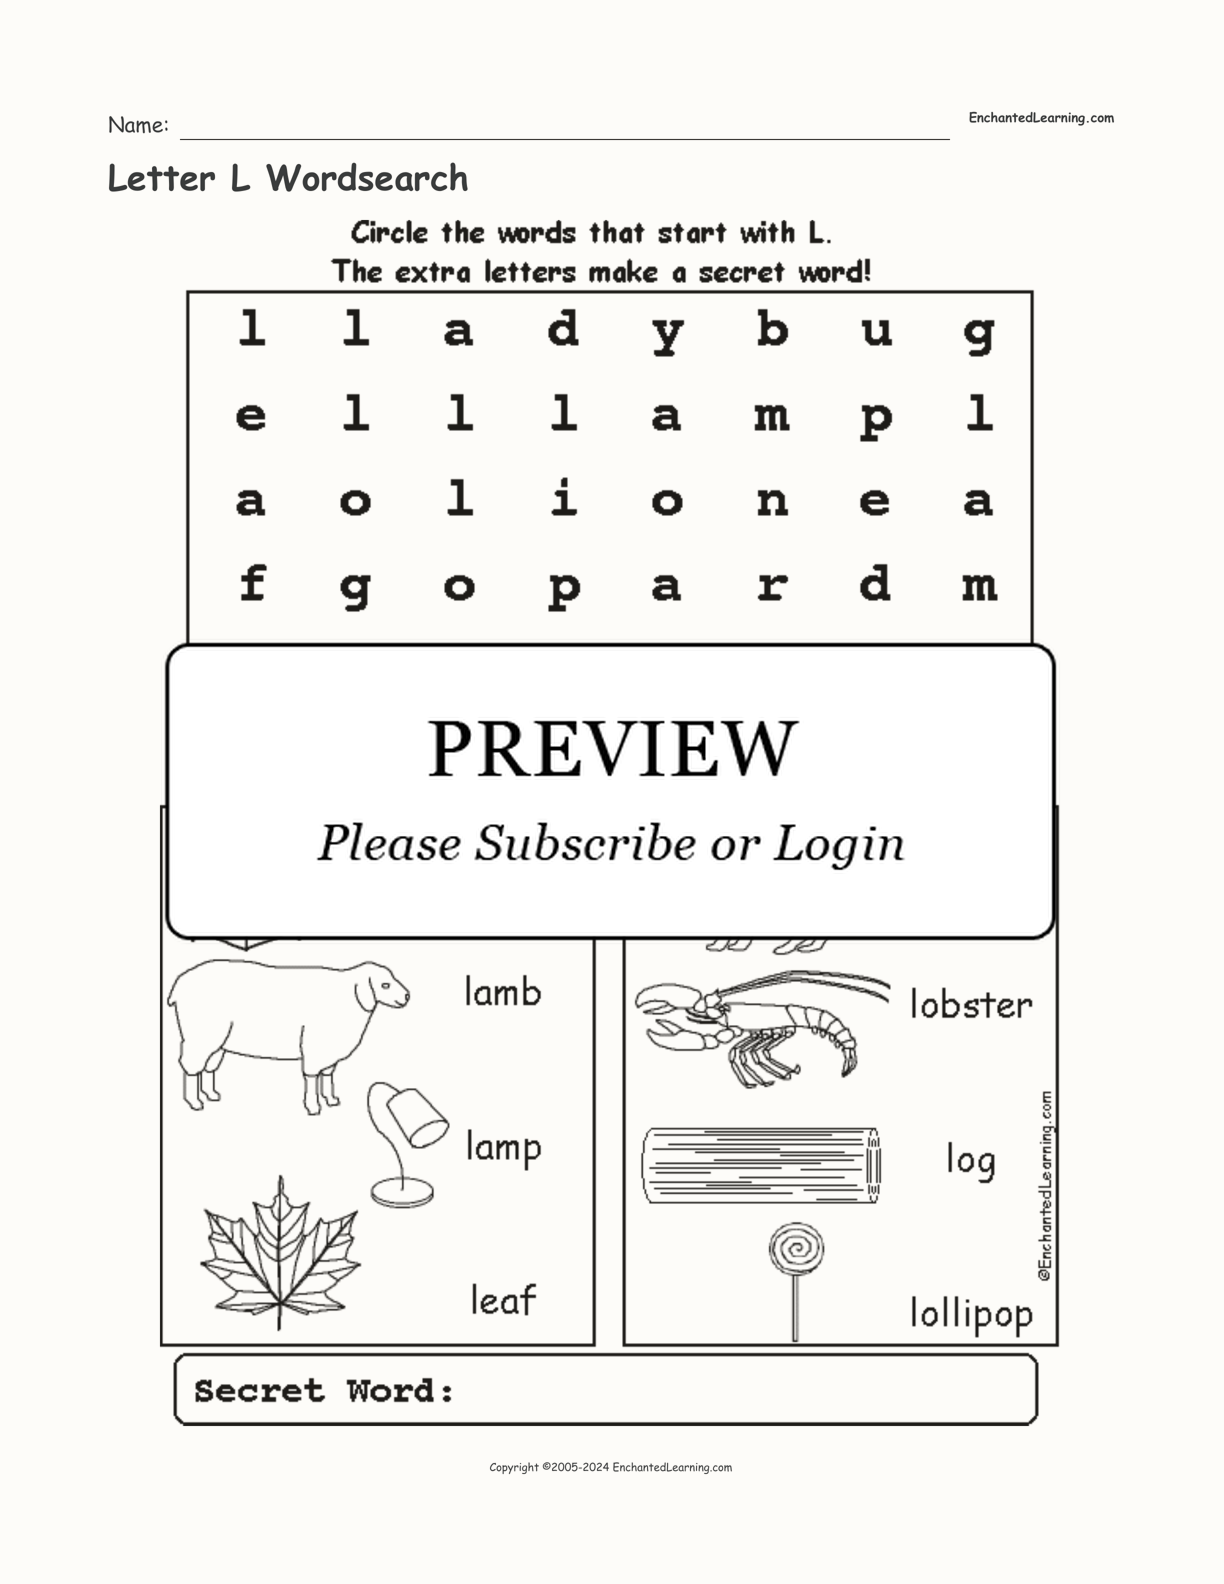 Letter L Wordsearch interactive worksheet page 1